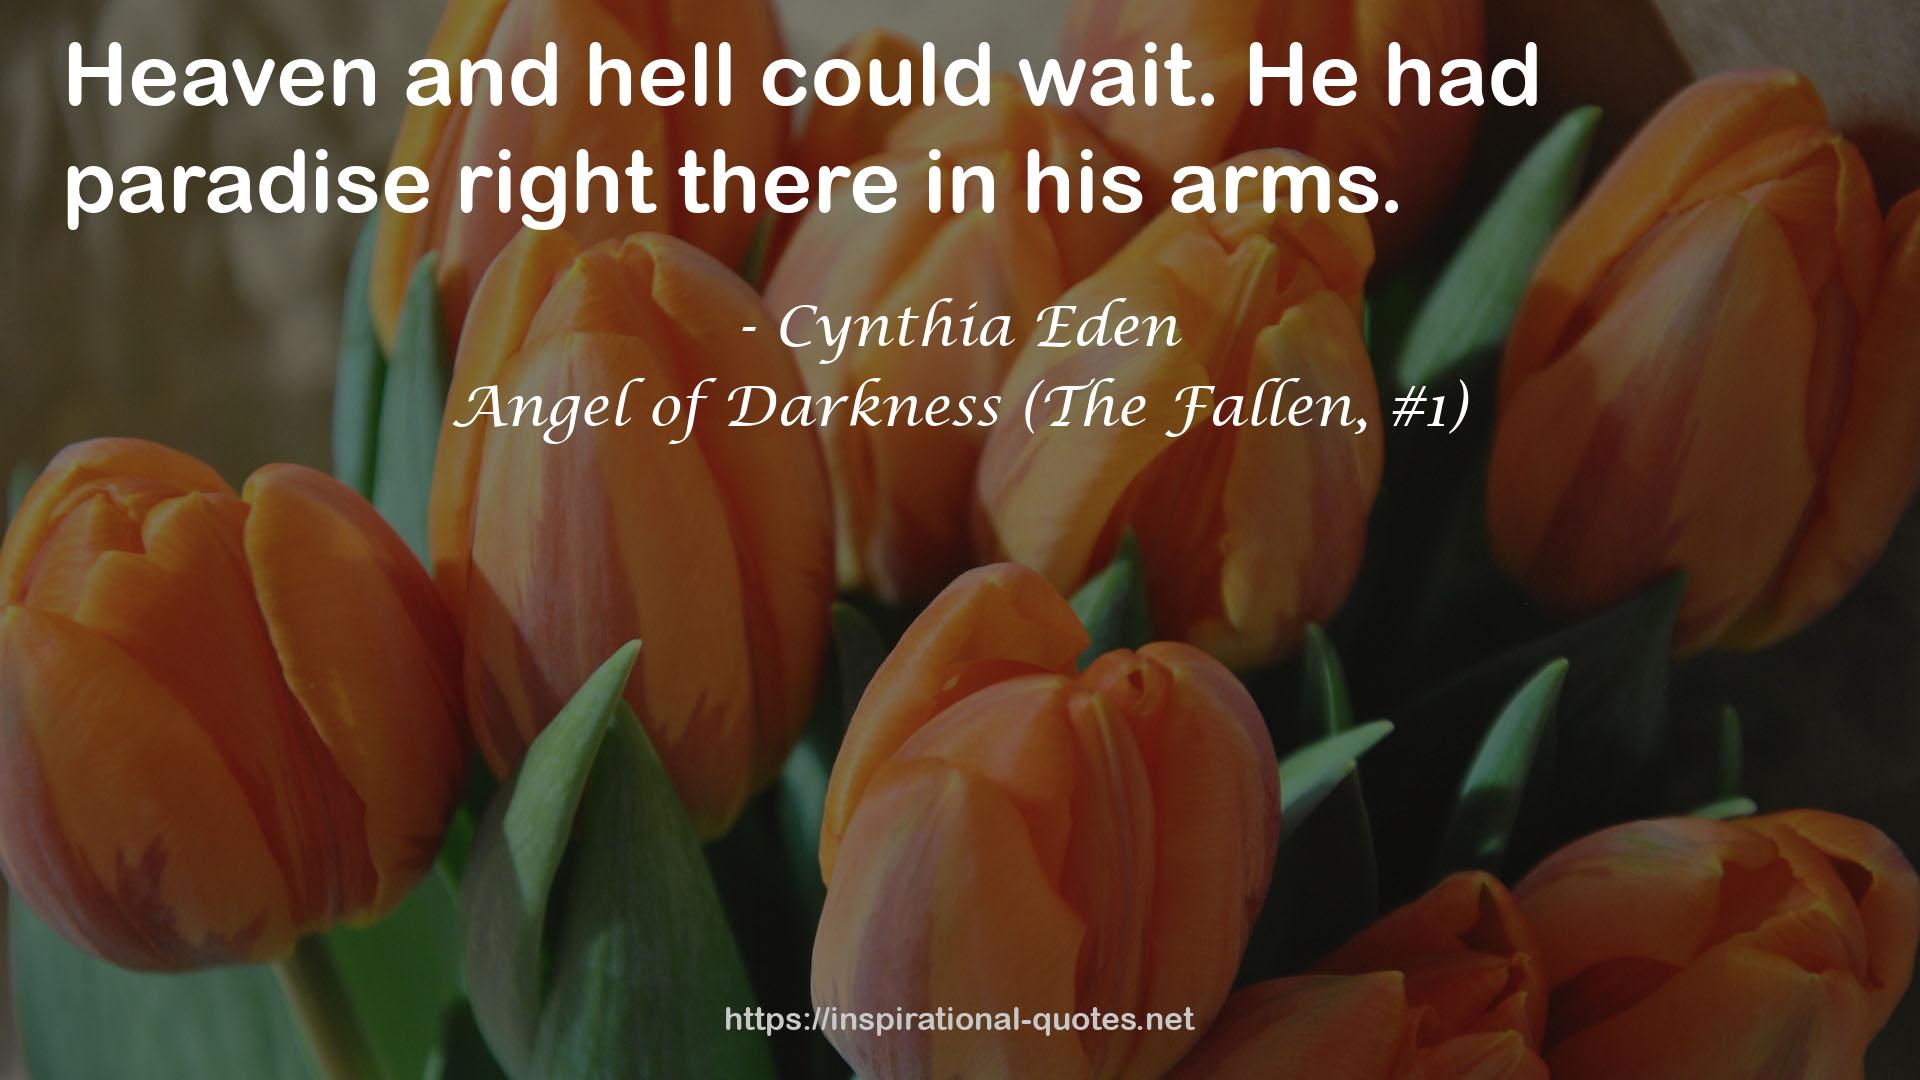 Angel of Darkness (The Fallen, #1) QUOTES